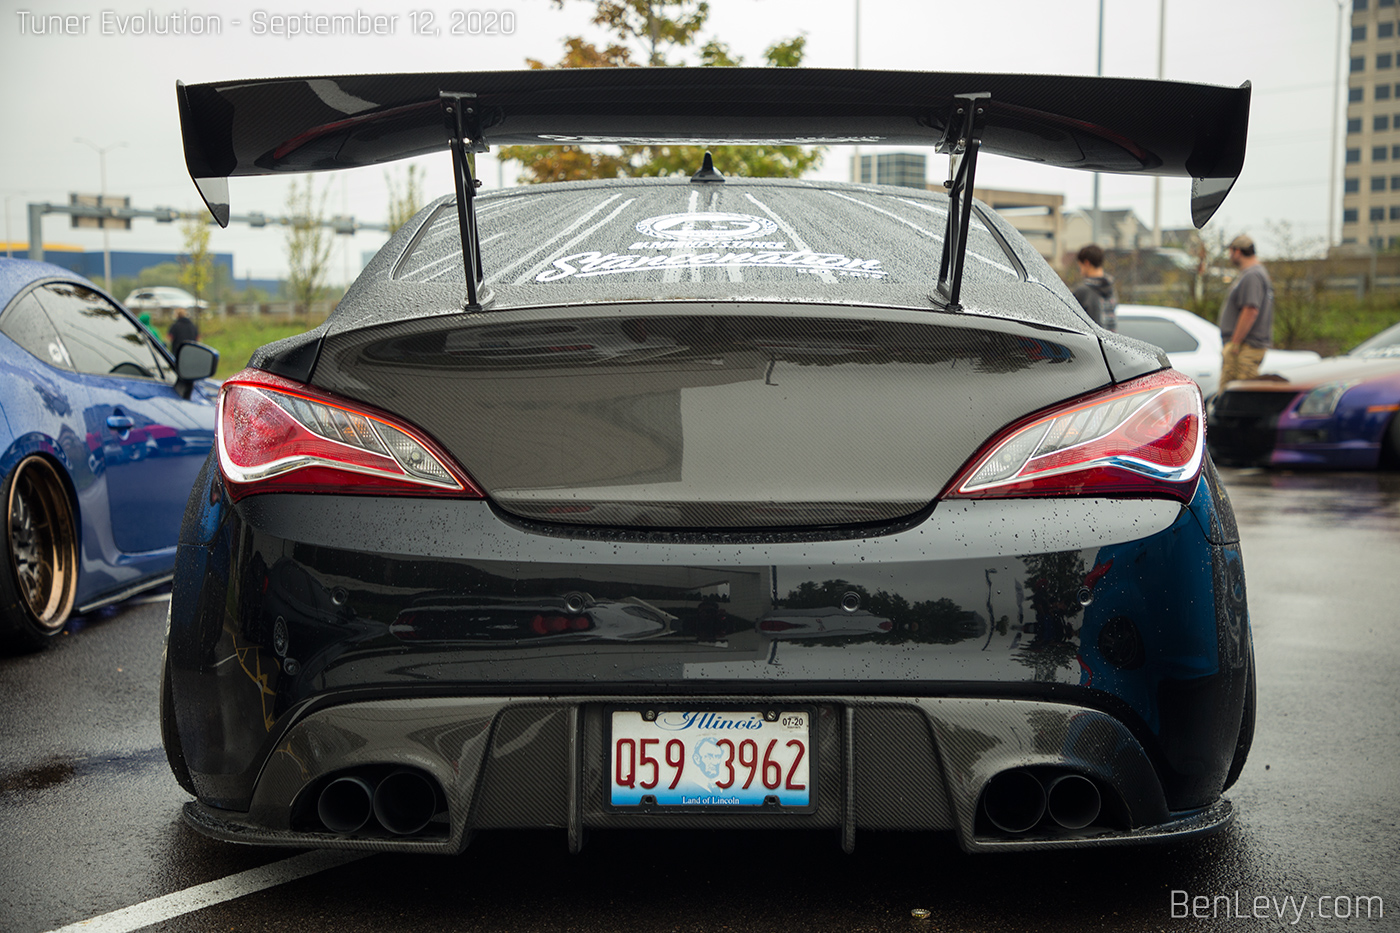 Carbon Fiber Trunklid and Spoiler on Hyundai Genesis Coupe